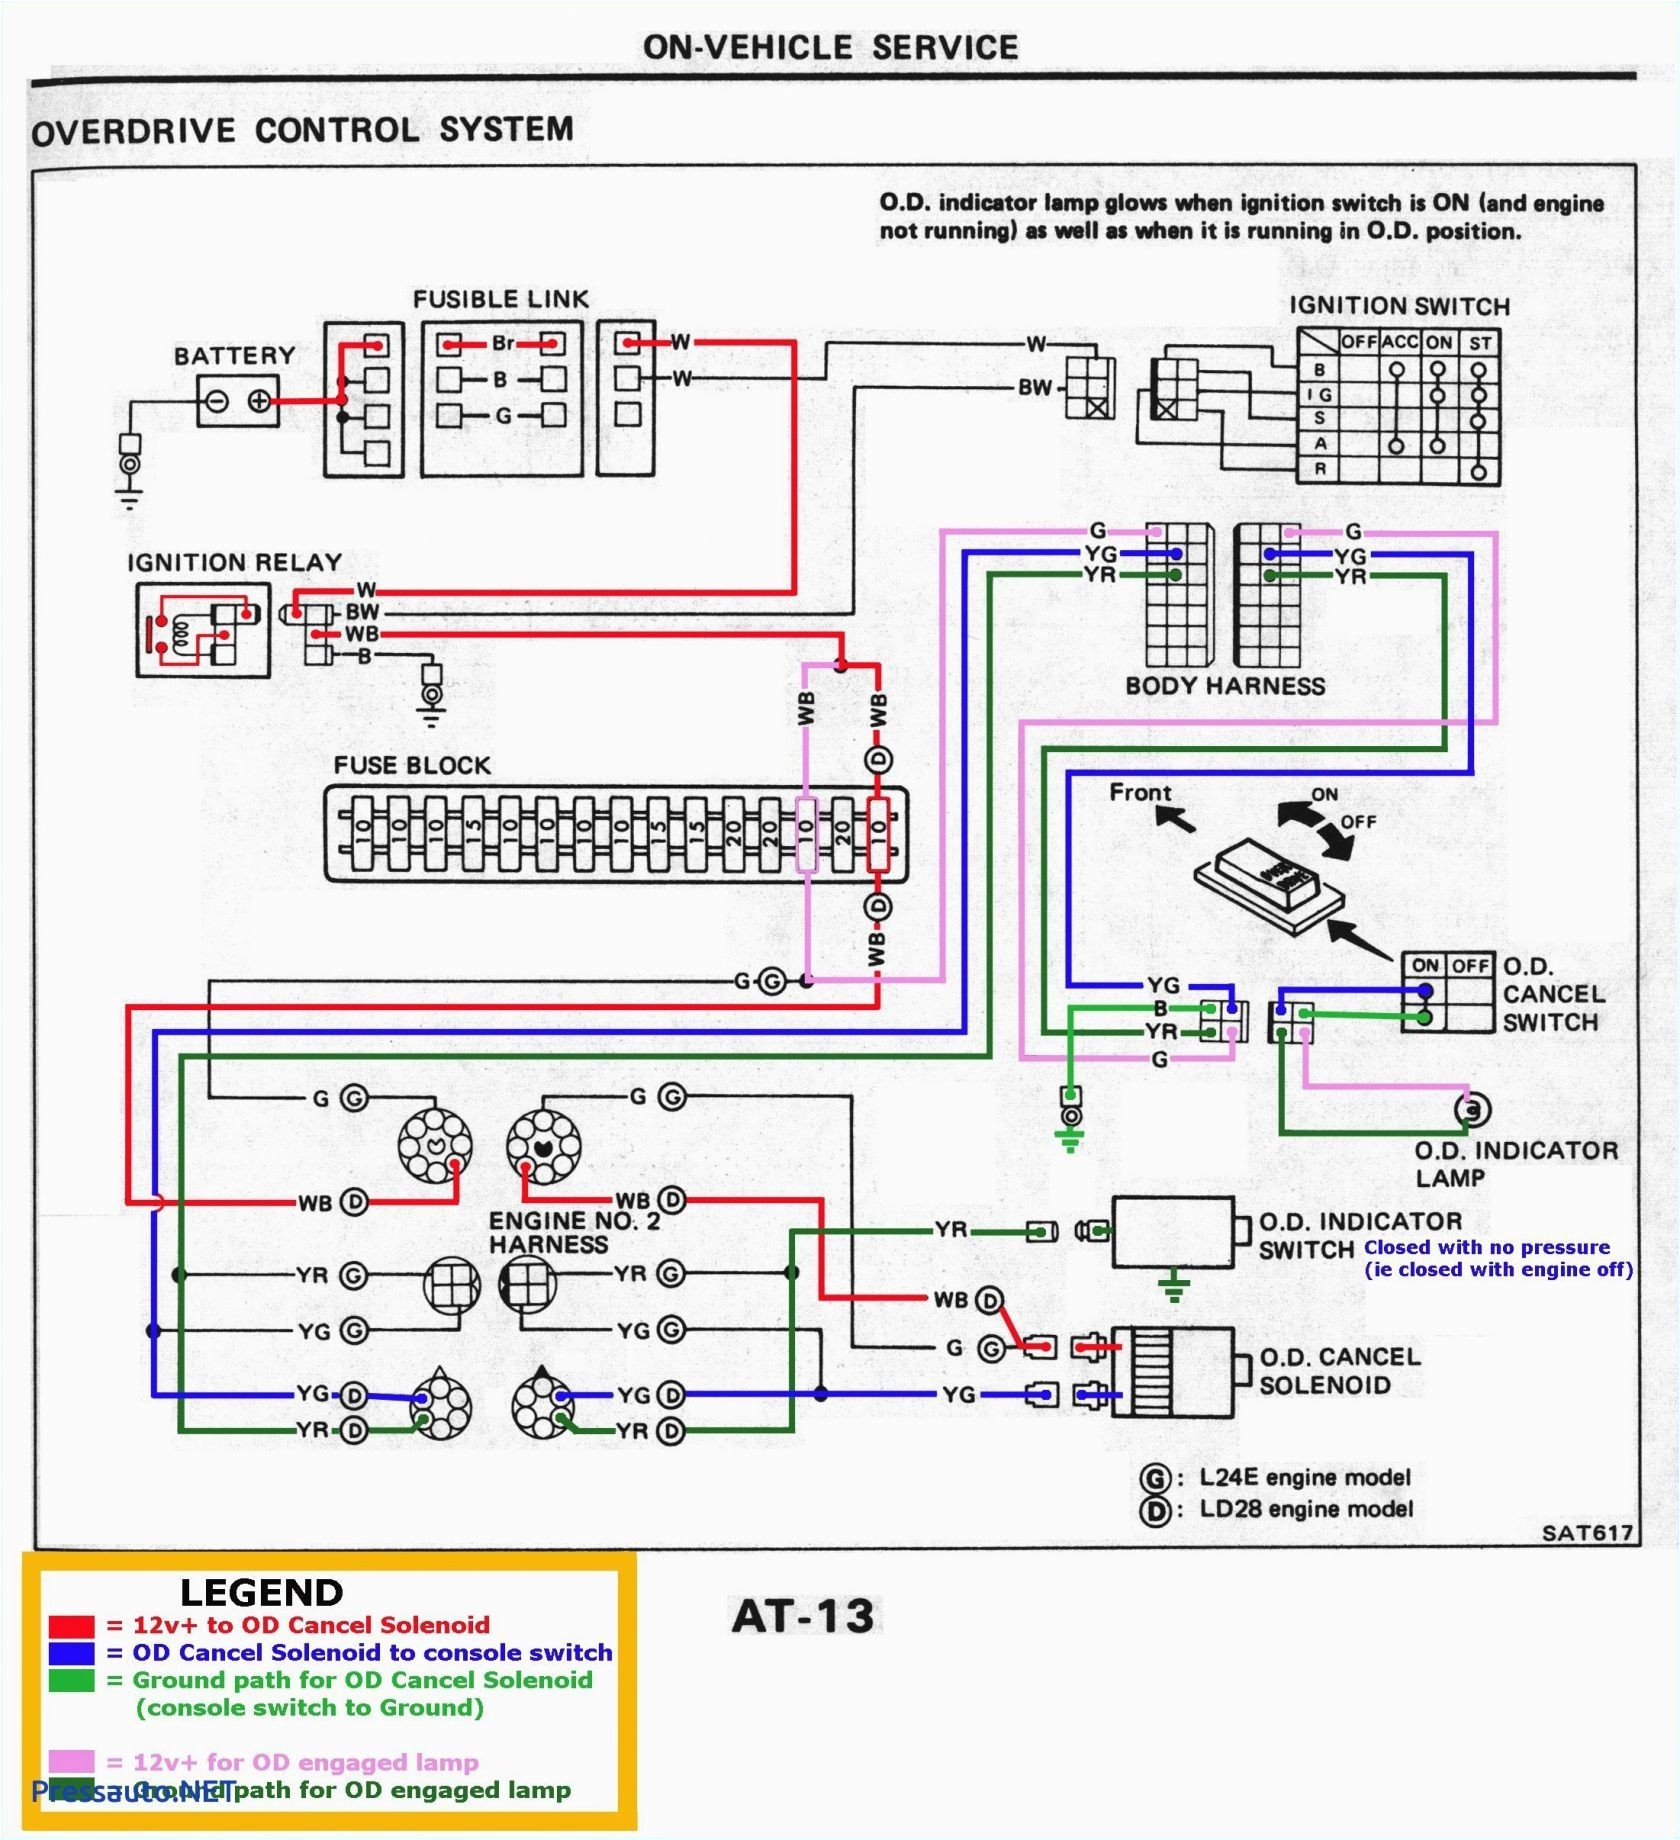 Lutron Cl Dimmer Wiring Diagram Mh Ms Ops5m Wiring Diagram Lutron Occupancy Sensor Switch Premium